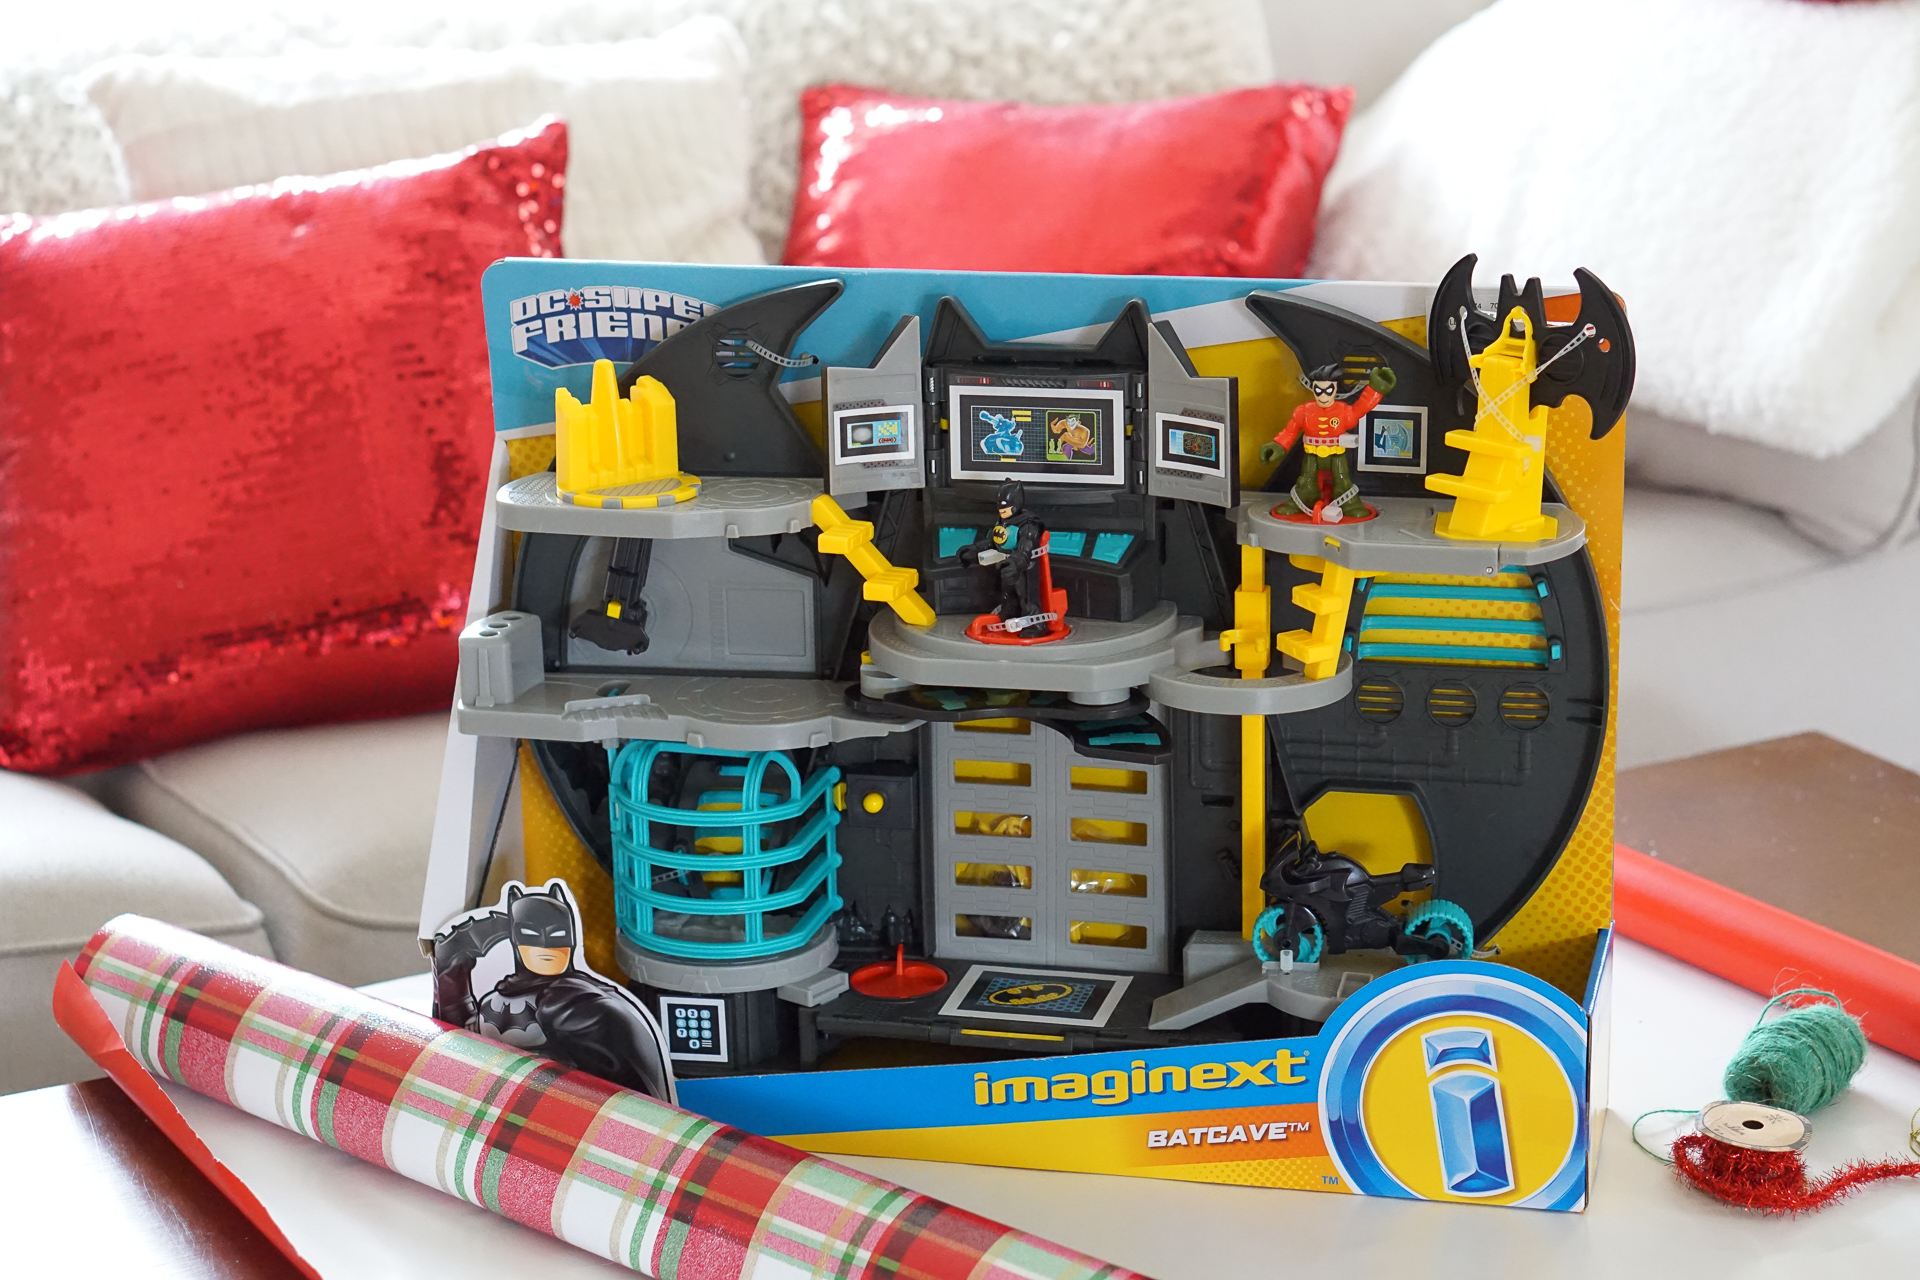 Hot Holiday Toys Kids Want This Year 